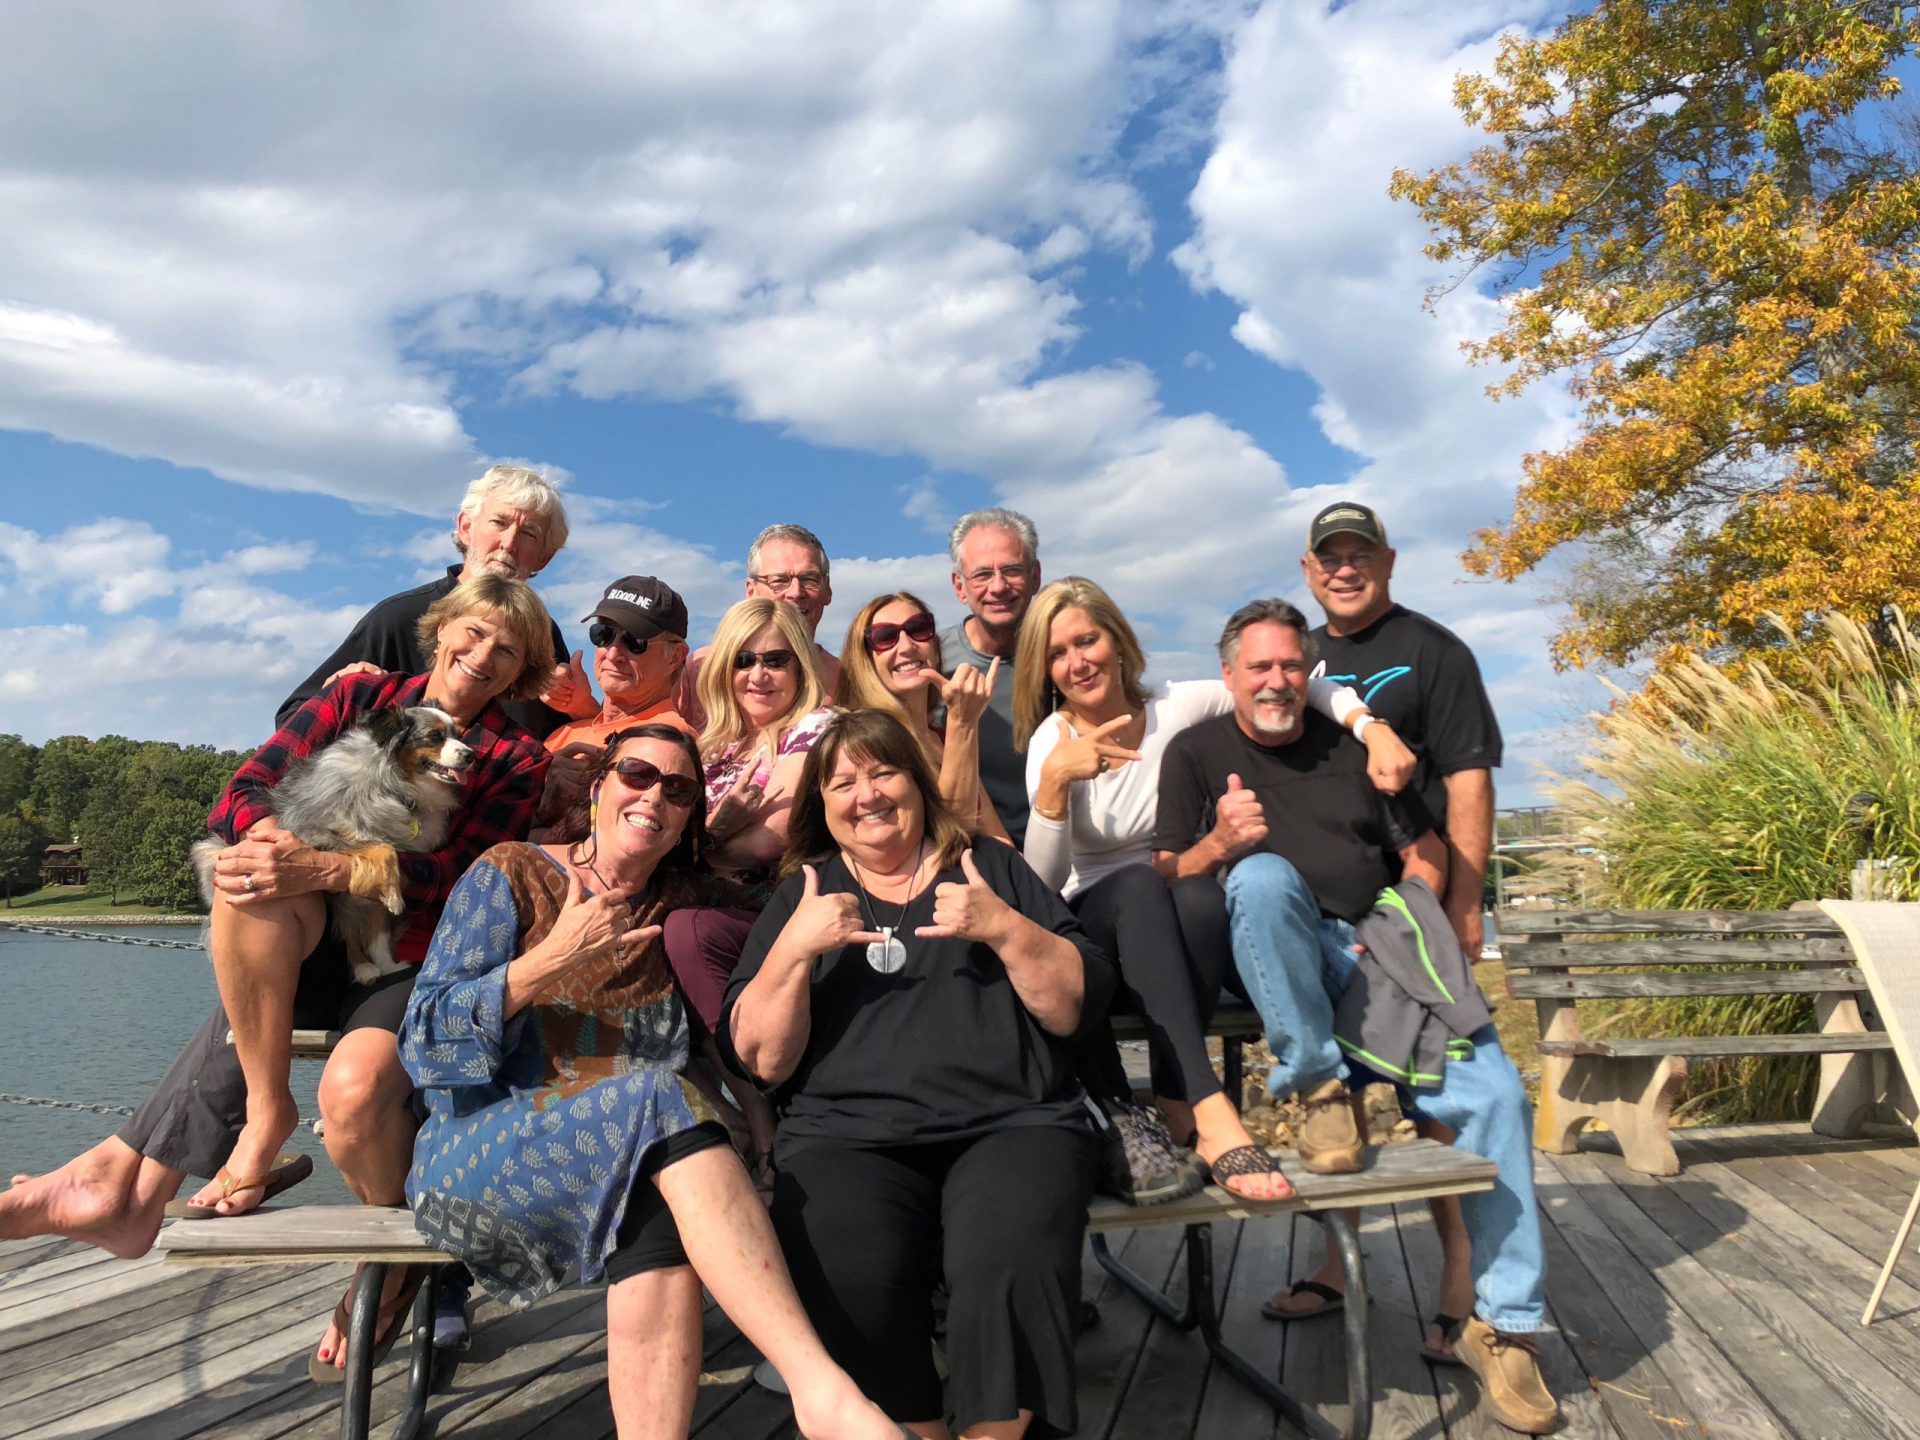 Dentist retreat - Dental team communication is most essential when building empowered teams that thrive in comprehensive dentistry - both strategic planning, training, and personal coaching.